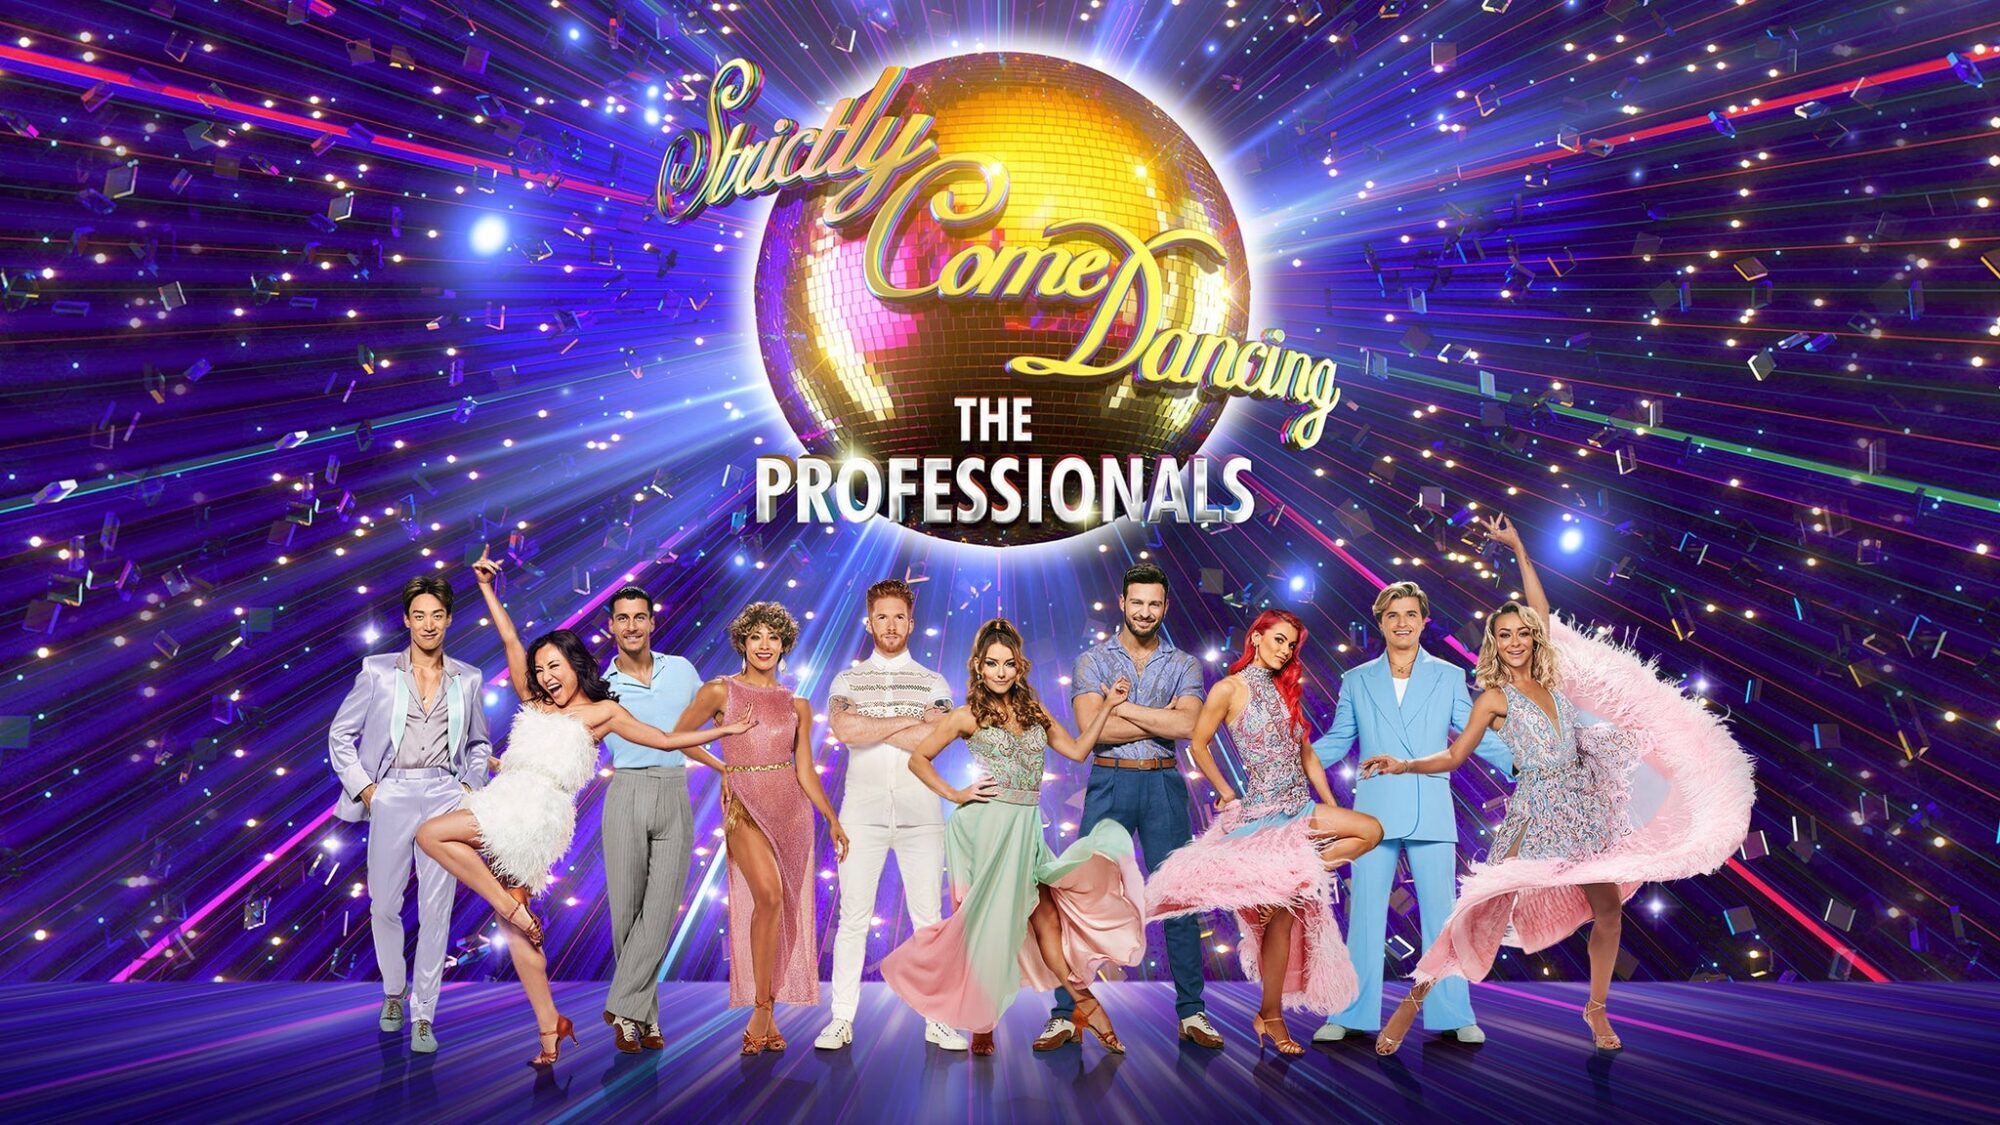 Image name Strictly Come Dancing the Professionals 2023 at Sheffield City Hall Oval Hall Sheffield the 19 image from the post Strictly Come Dancing the Professionals 2023 at York Barbican, York in Yorkshire.com.